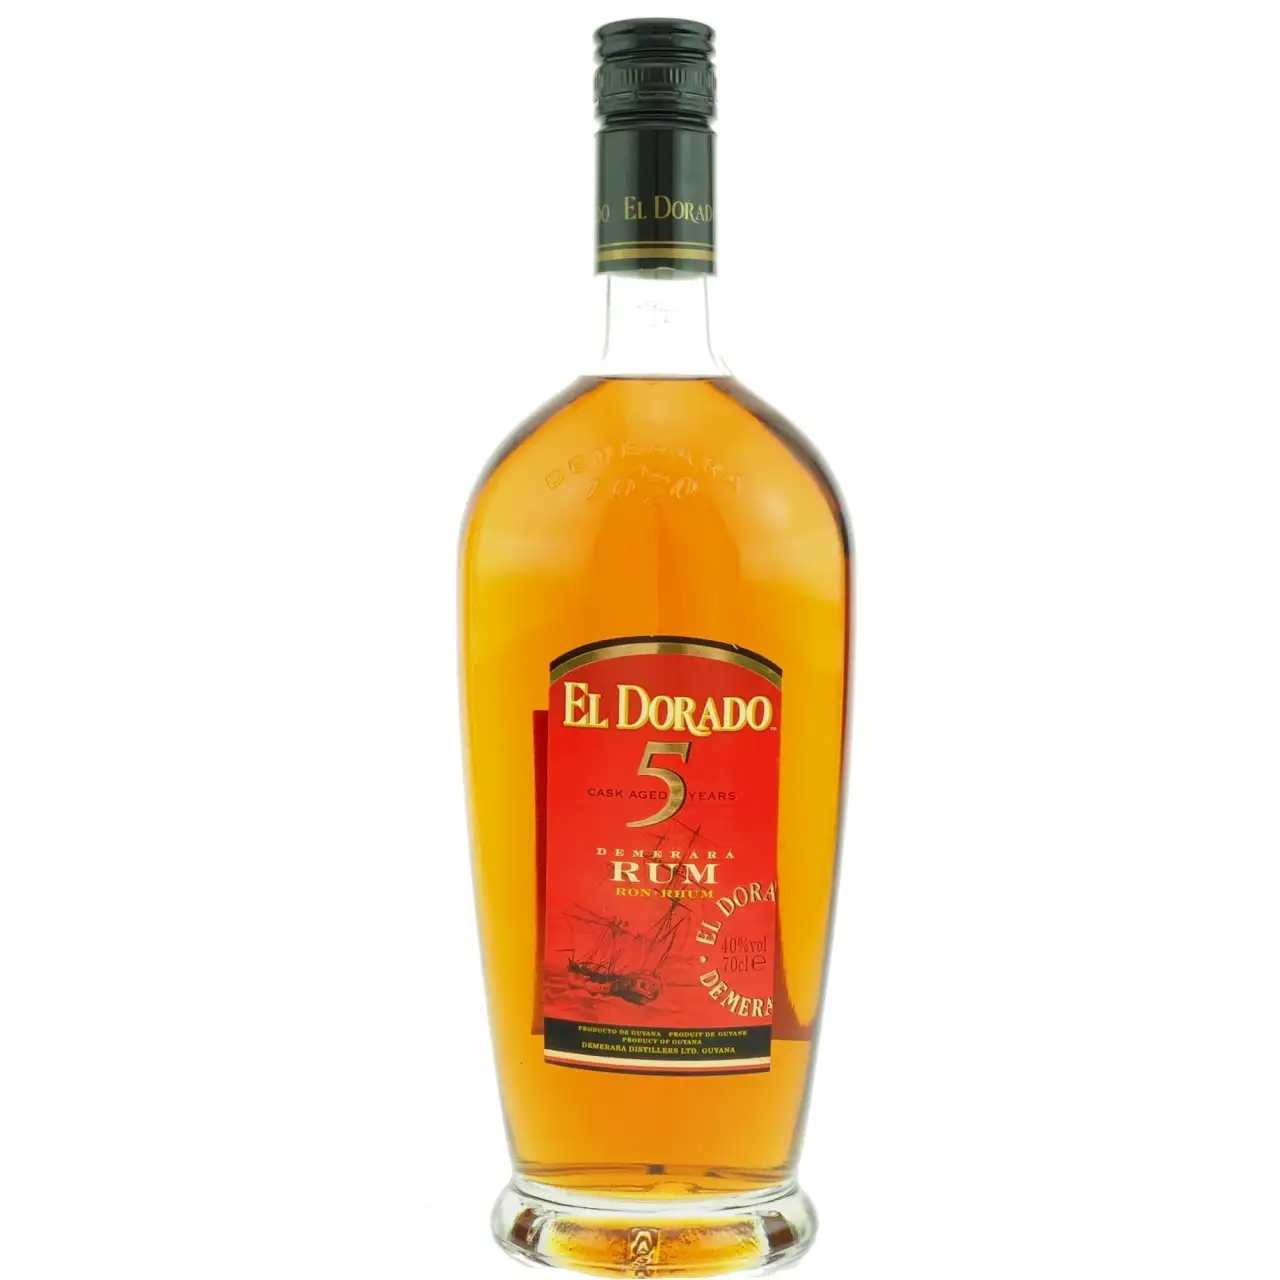 Image of the front of the bottle of the rum El Dorado 5